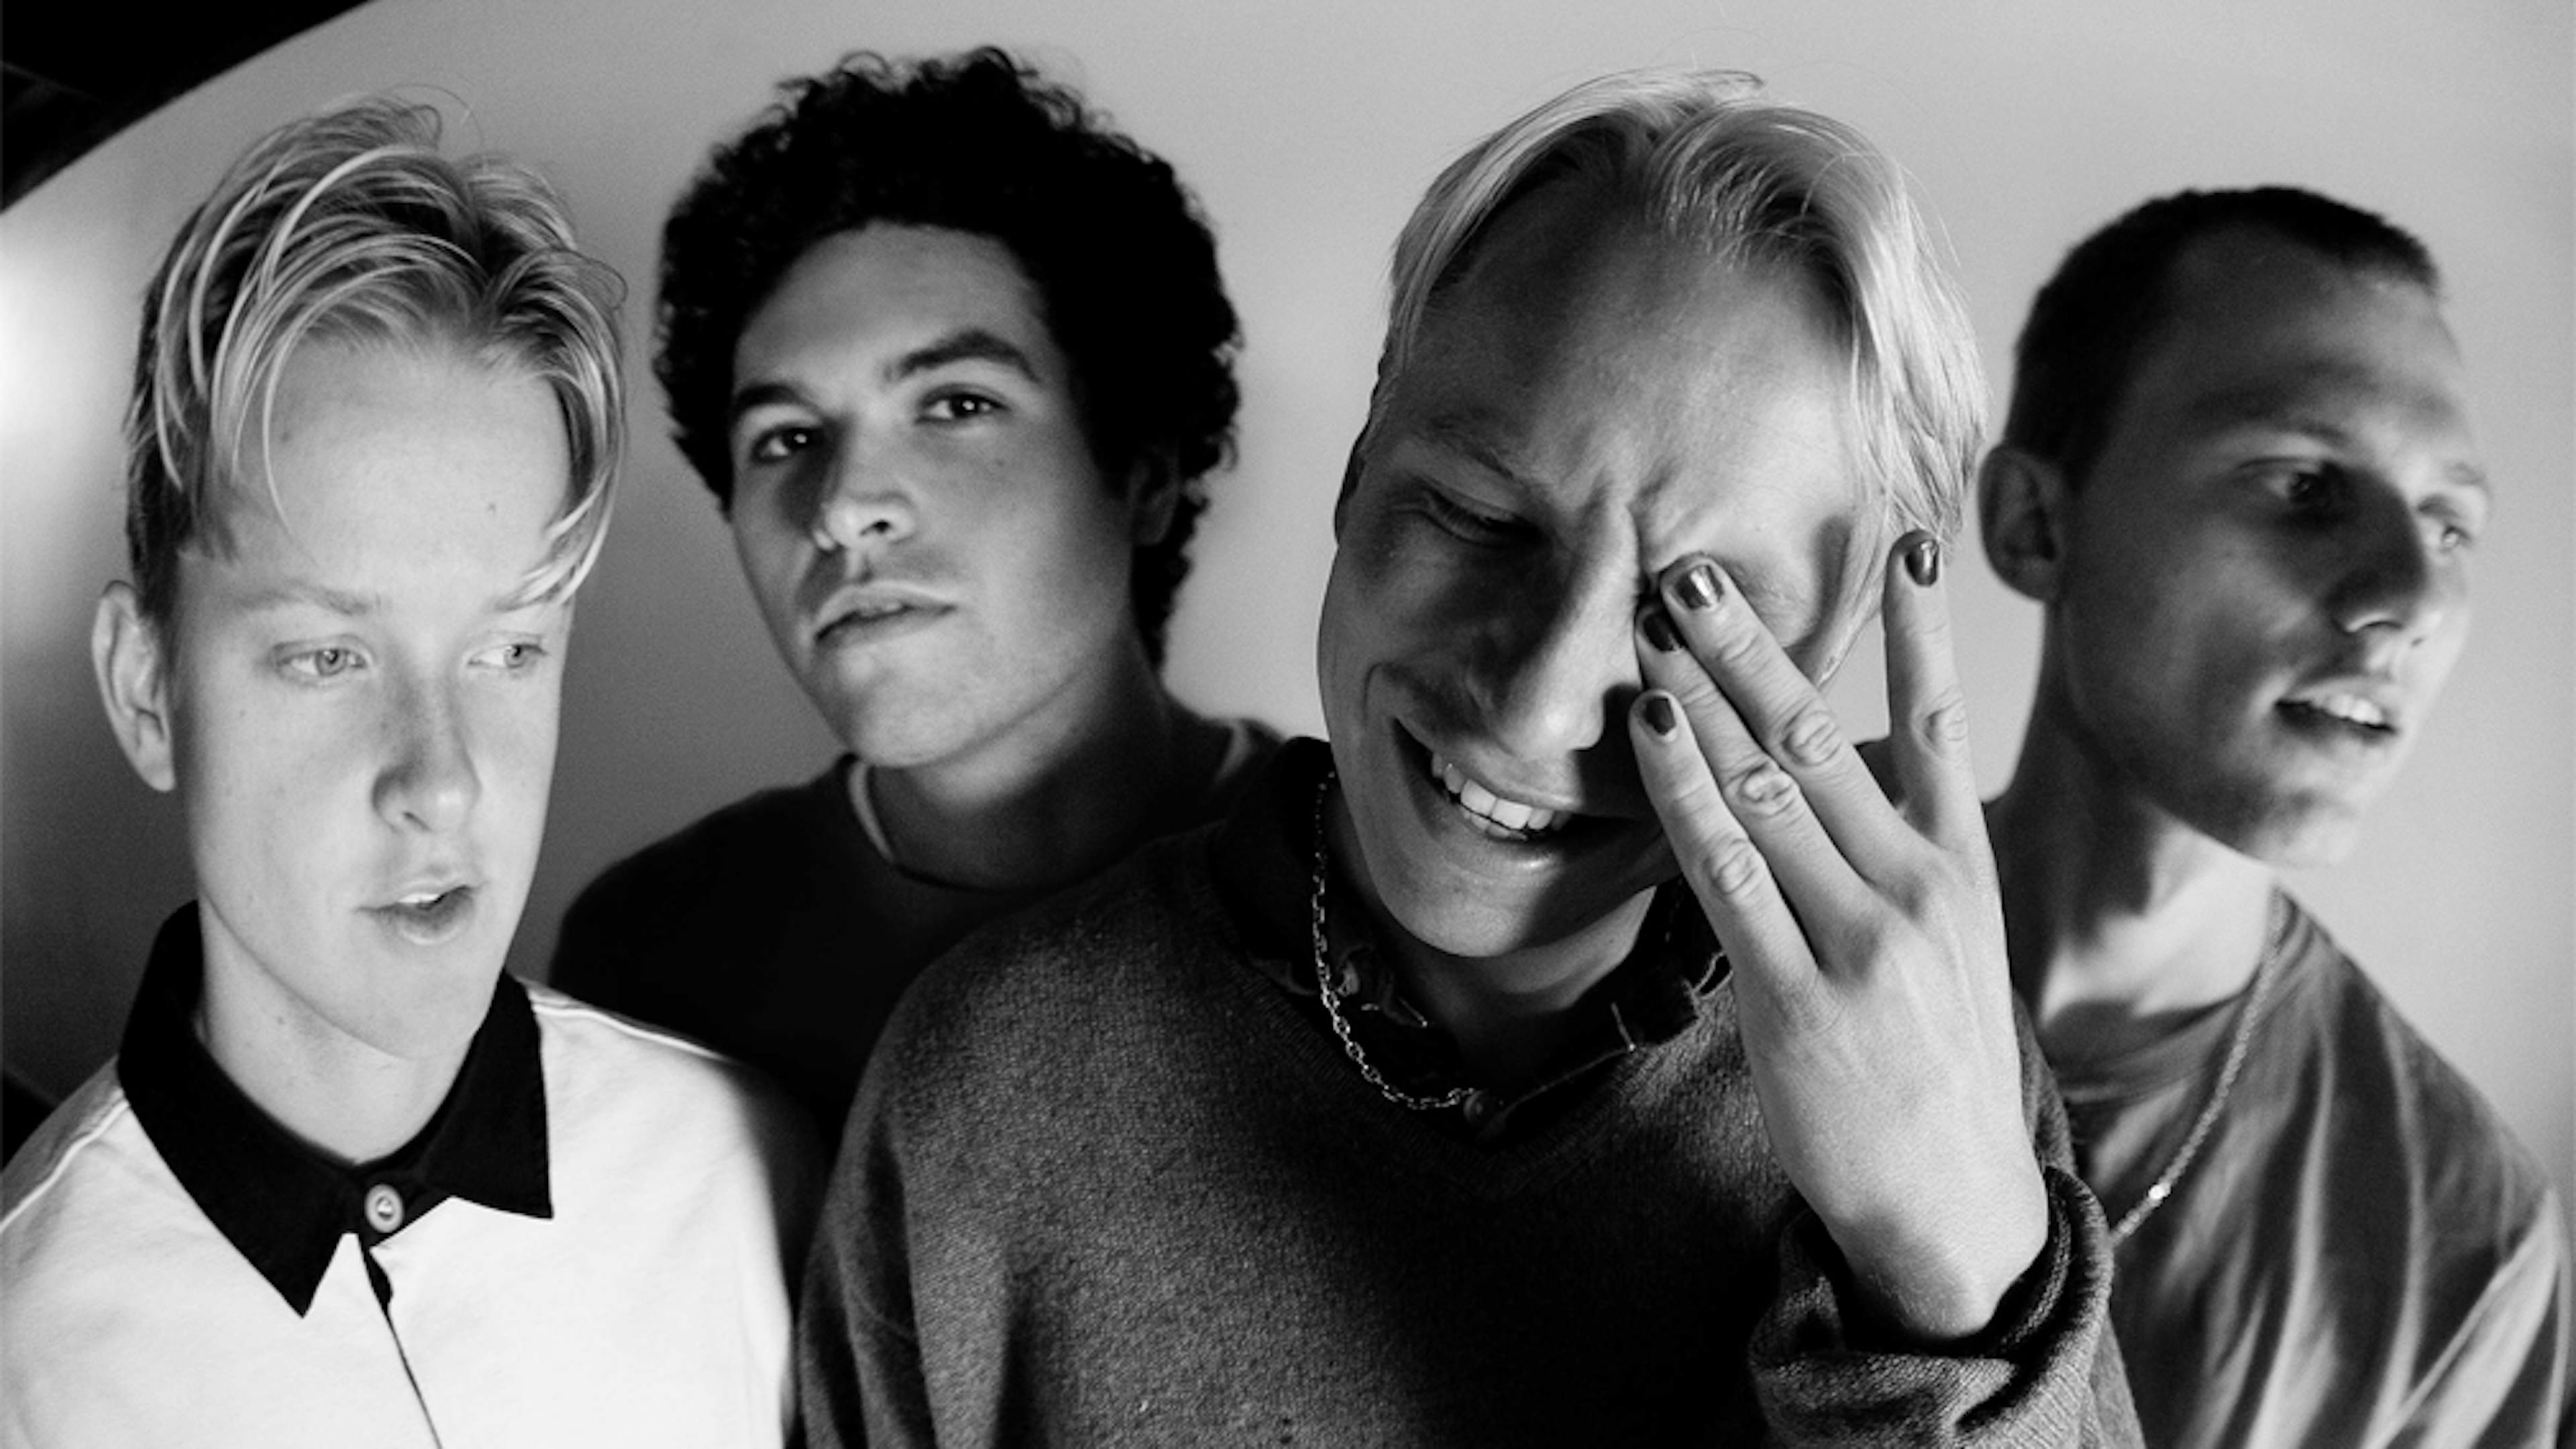 SWMRS On New Album: "We’re Doing The Absolute Best Work We'll Ever Do"